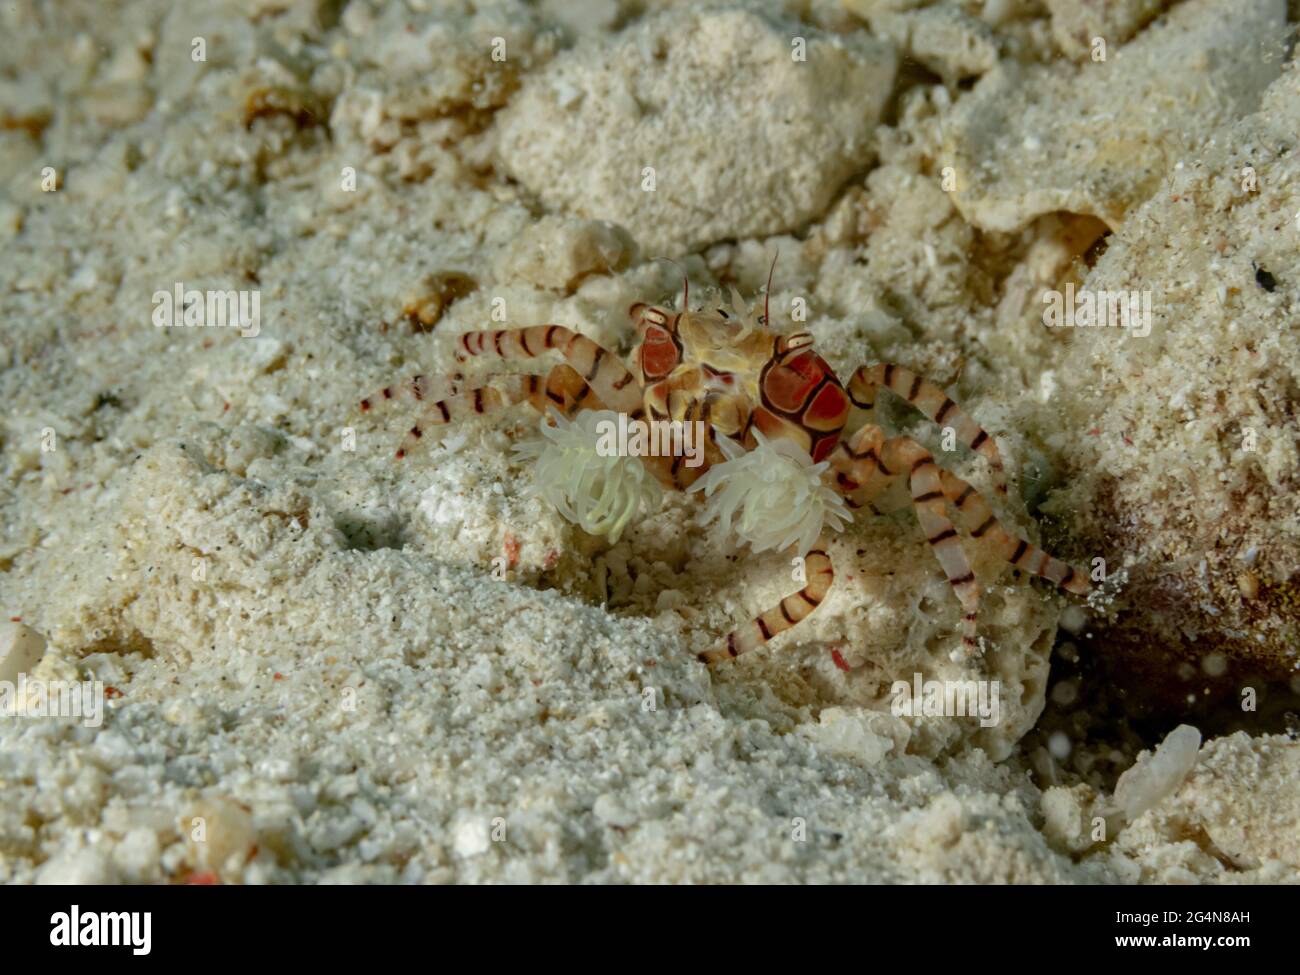 Full body colorful small boxer crab crawling on white sandy sea bottom in shallow water Stock Photo